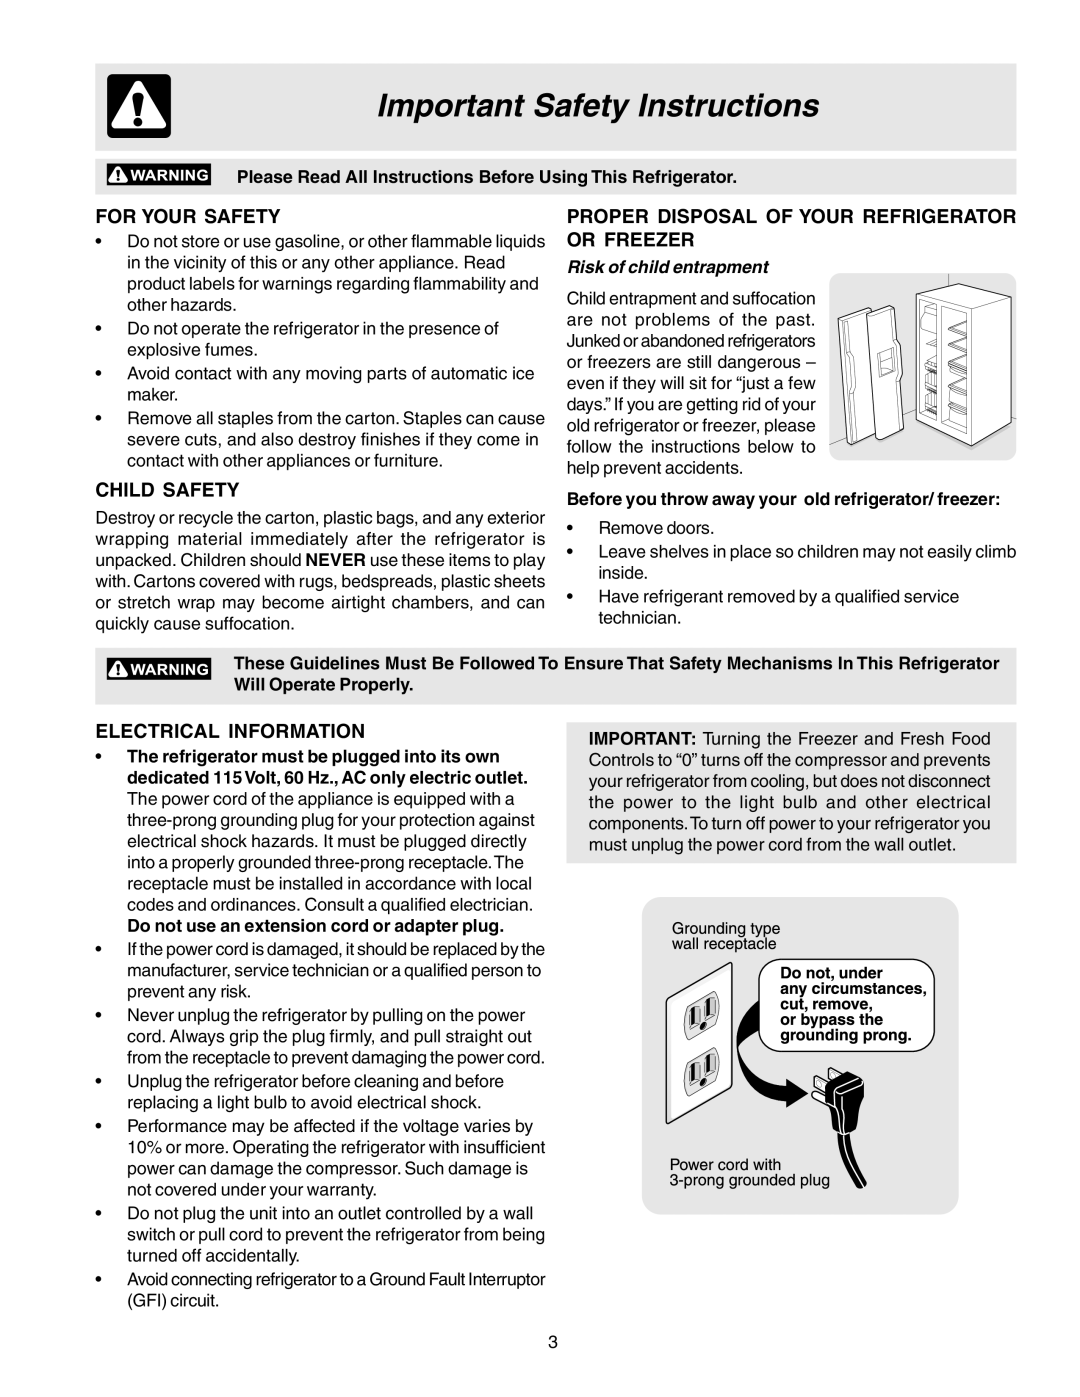 Frigidaire 240389312 manual Important Safety Instructions, For Your Safety, Proper Disposal Of Your Refrigerator Or Freezer 